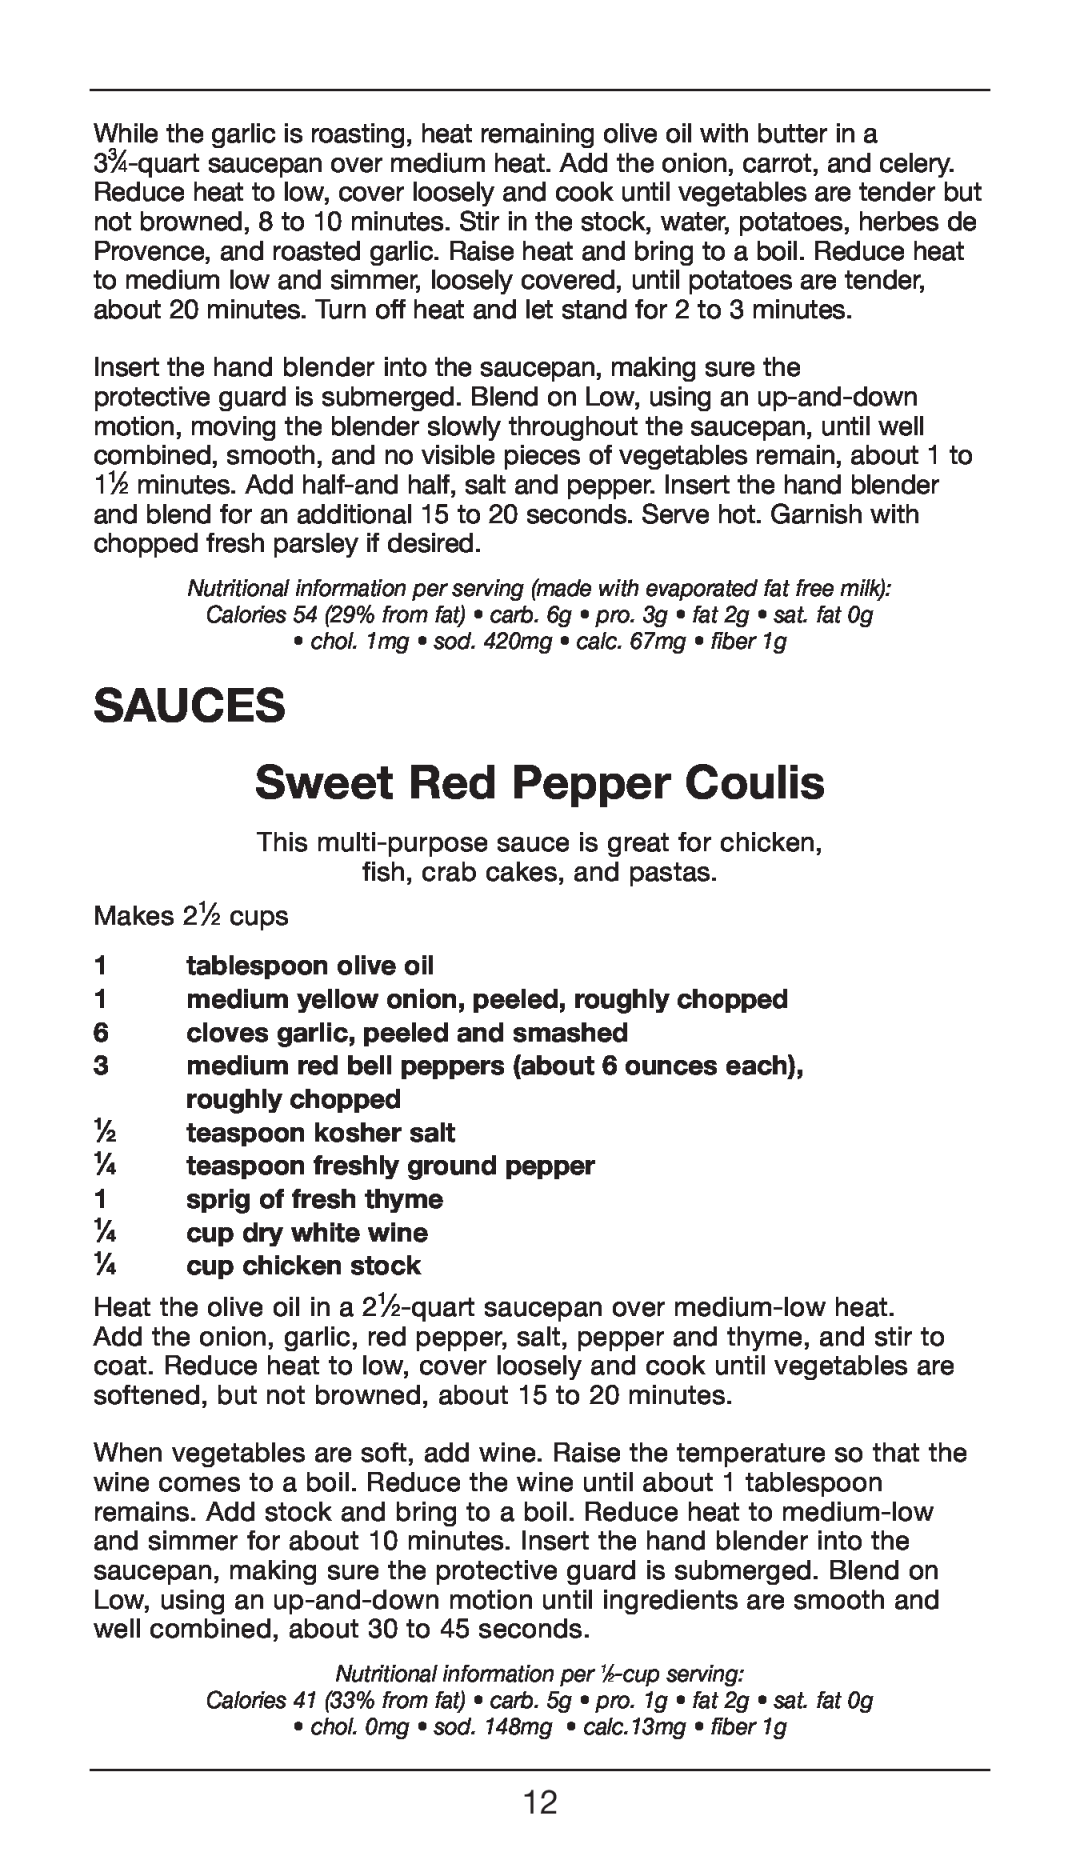 Cuisinart CSB-75 SAUCES Sweet Red Pepper Coulis, 1tablespoon olive oil 1 medium yellow onion, peeled, roughly chopped 